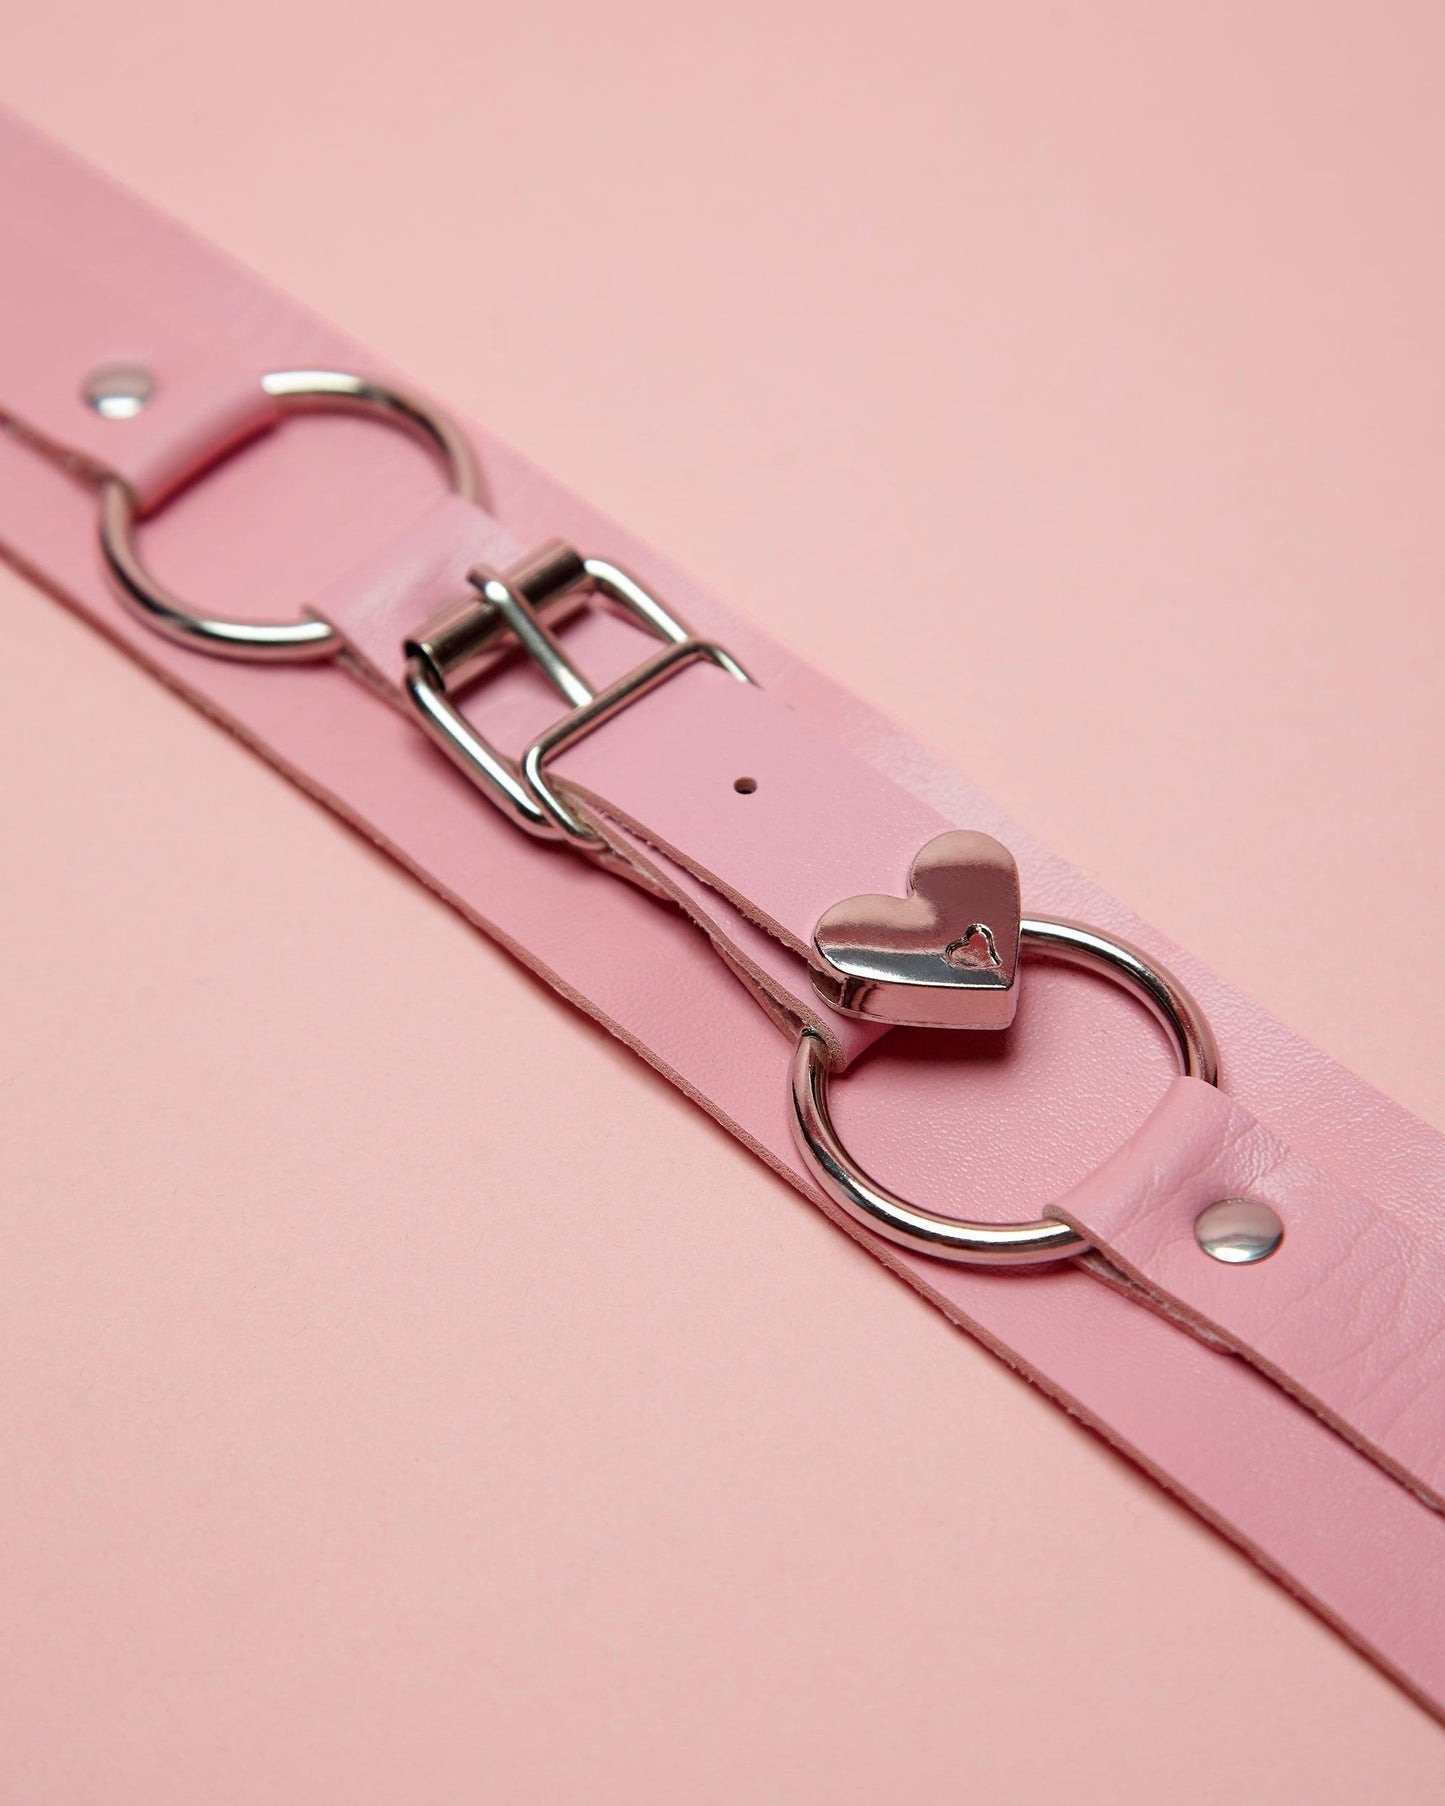 💕 Pink love heart, anime inspired bicep band 💕